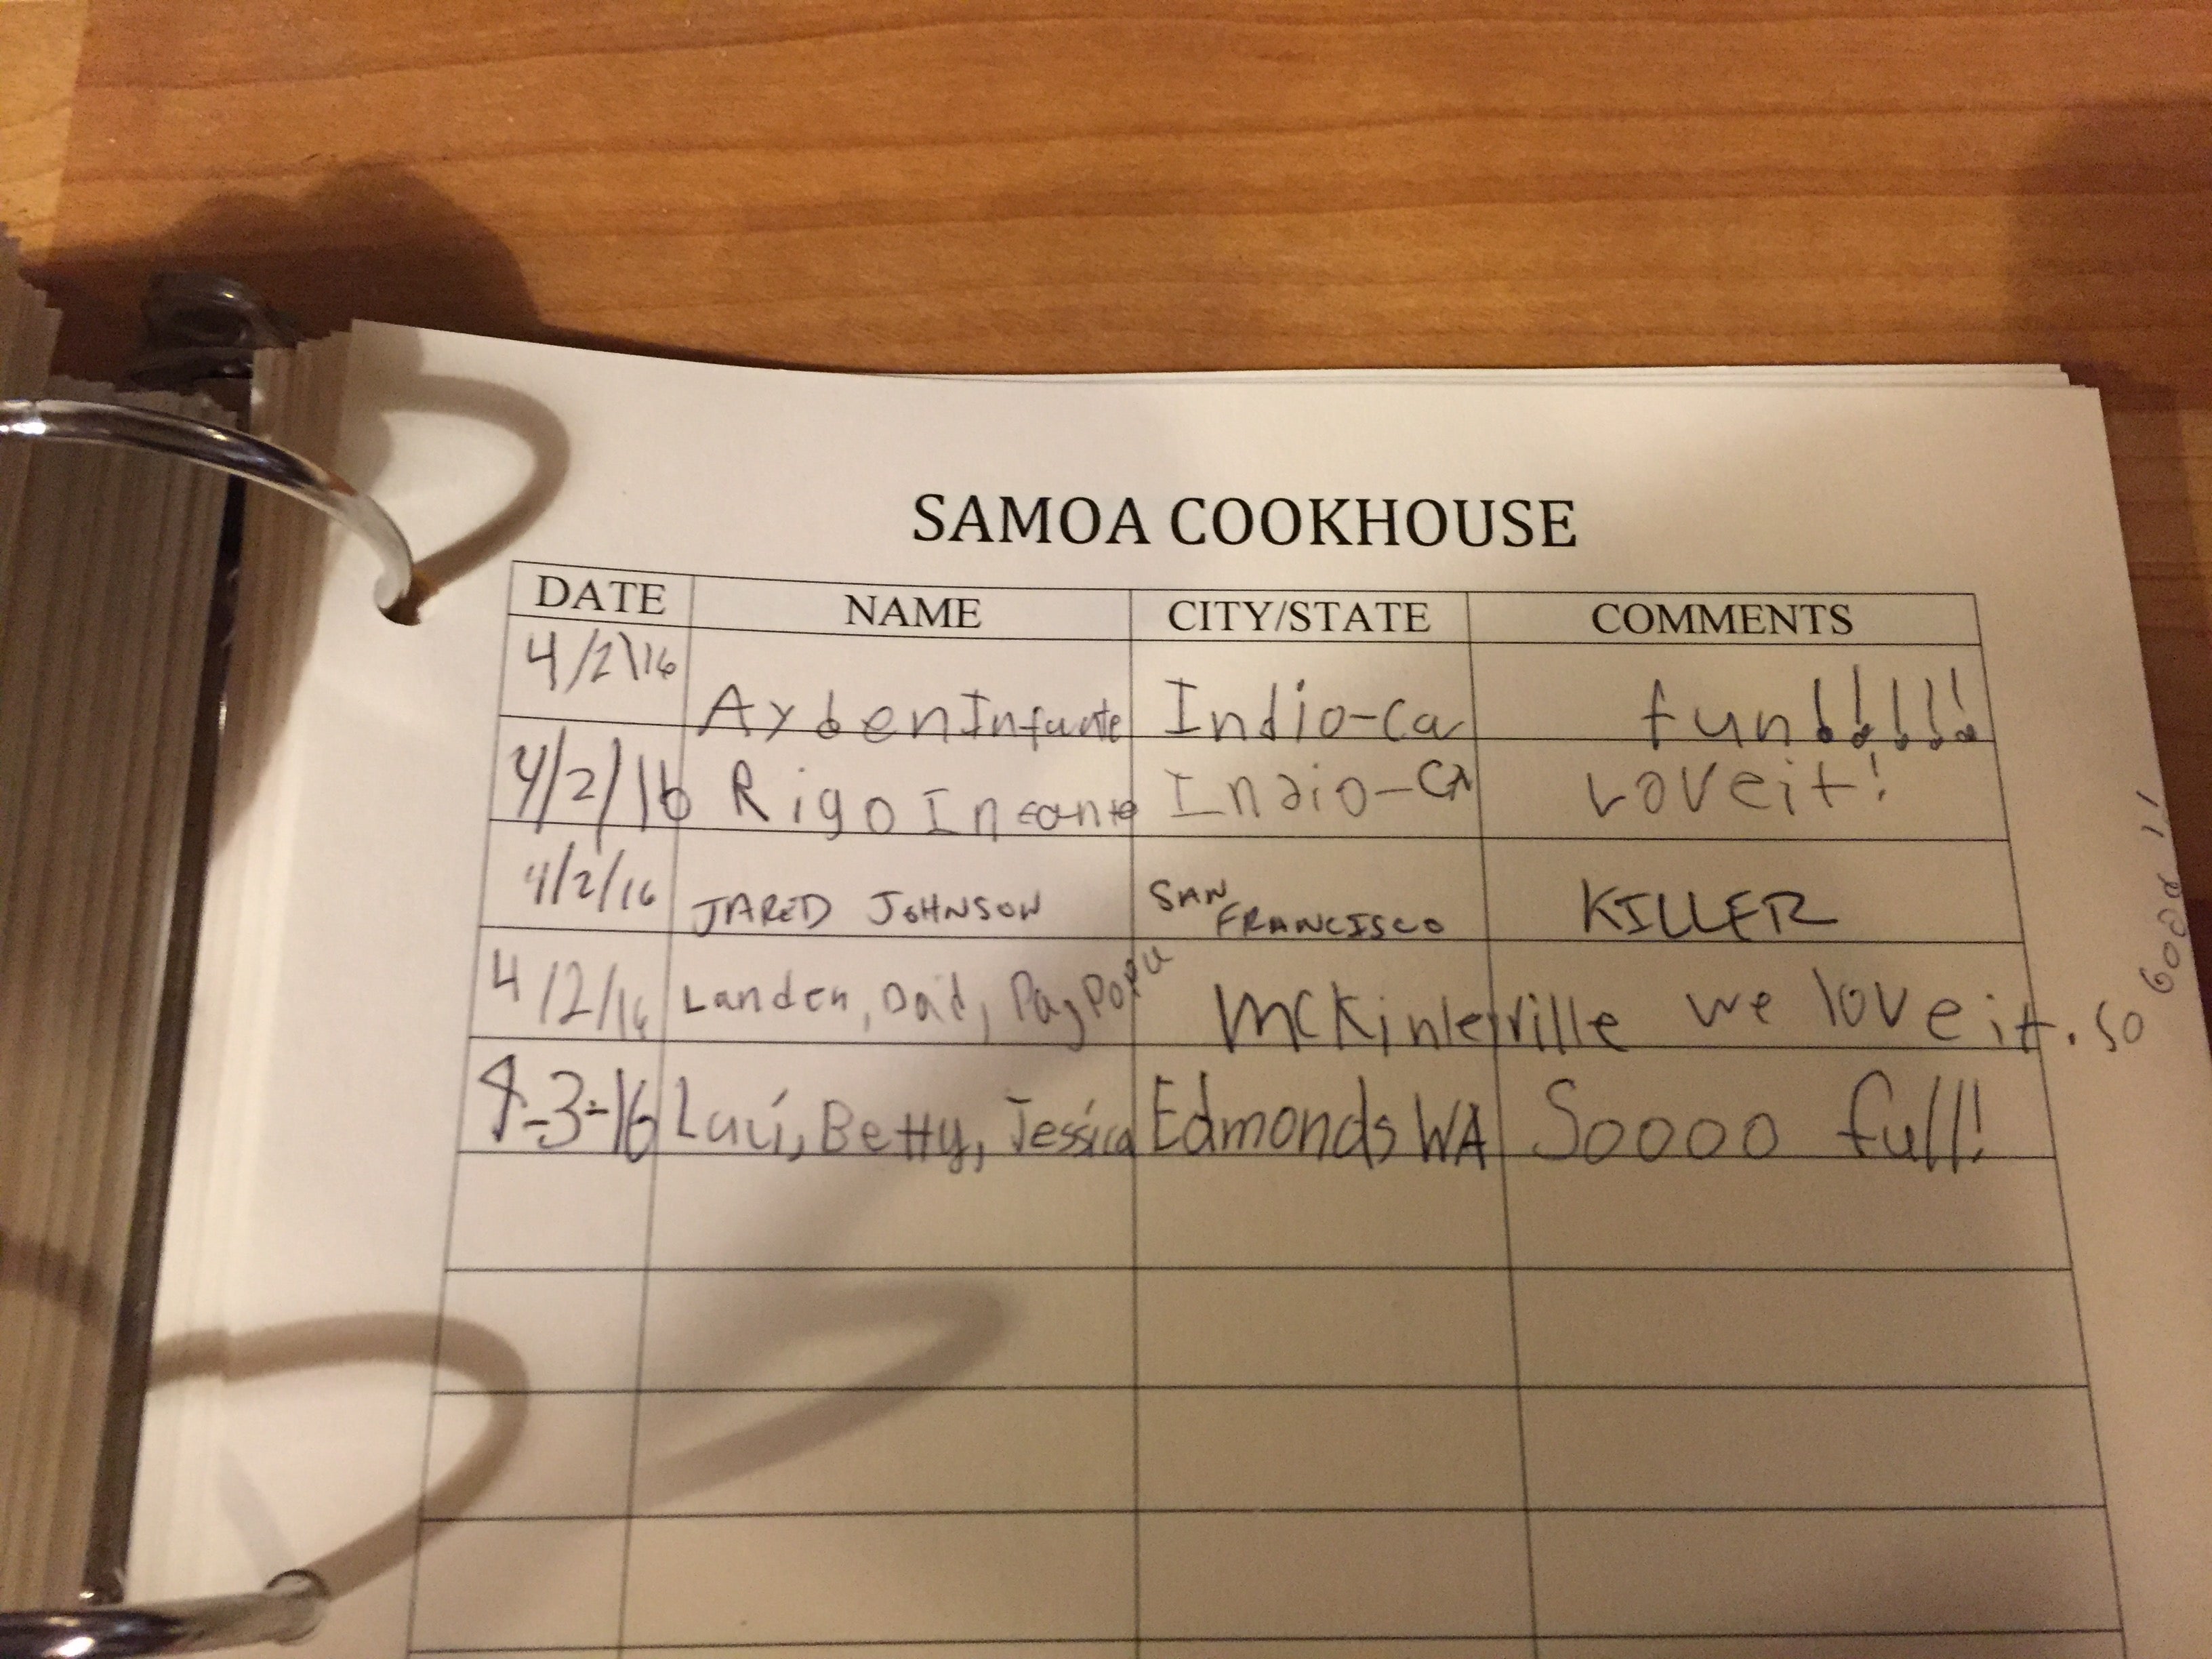 Samoa Cookhouse guest book. 